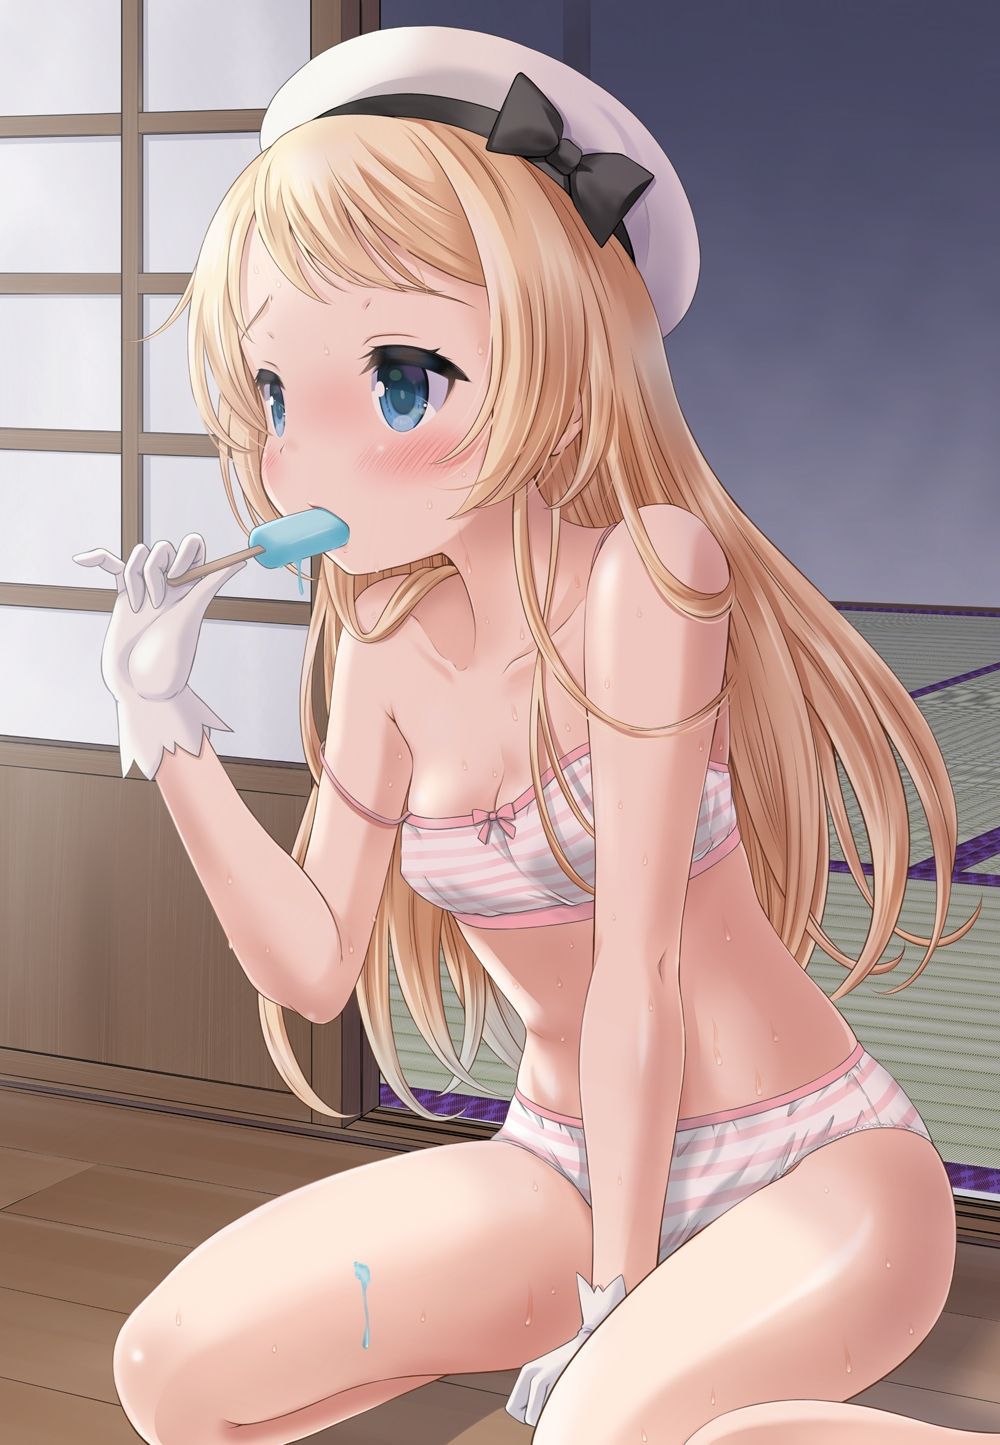 Erotic anime summary erotic image of a girl who is pretty good underwear [secondary erotic] 2